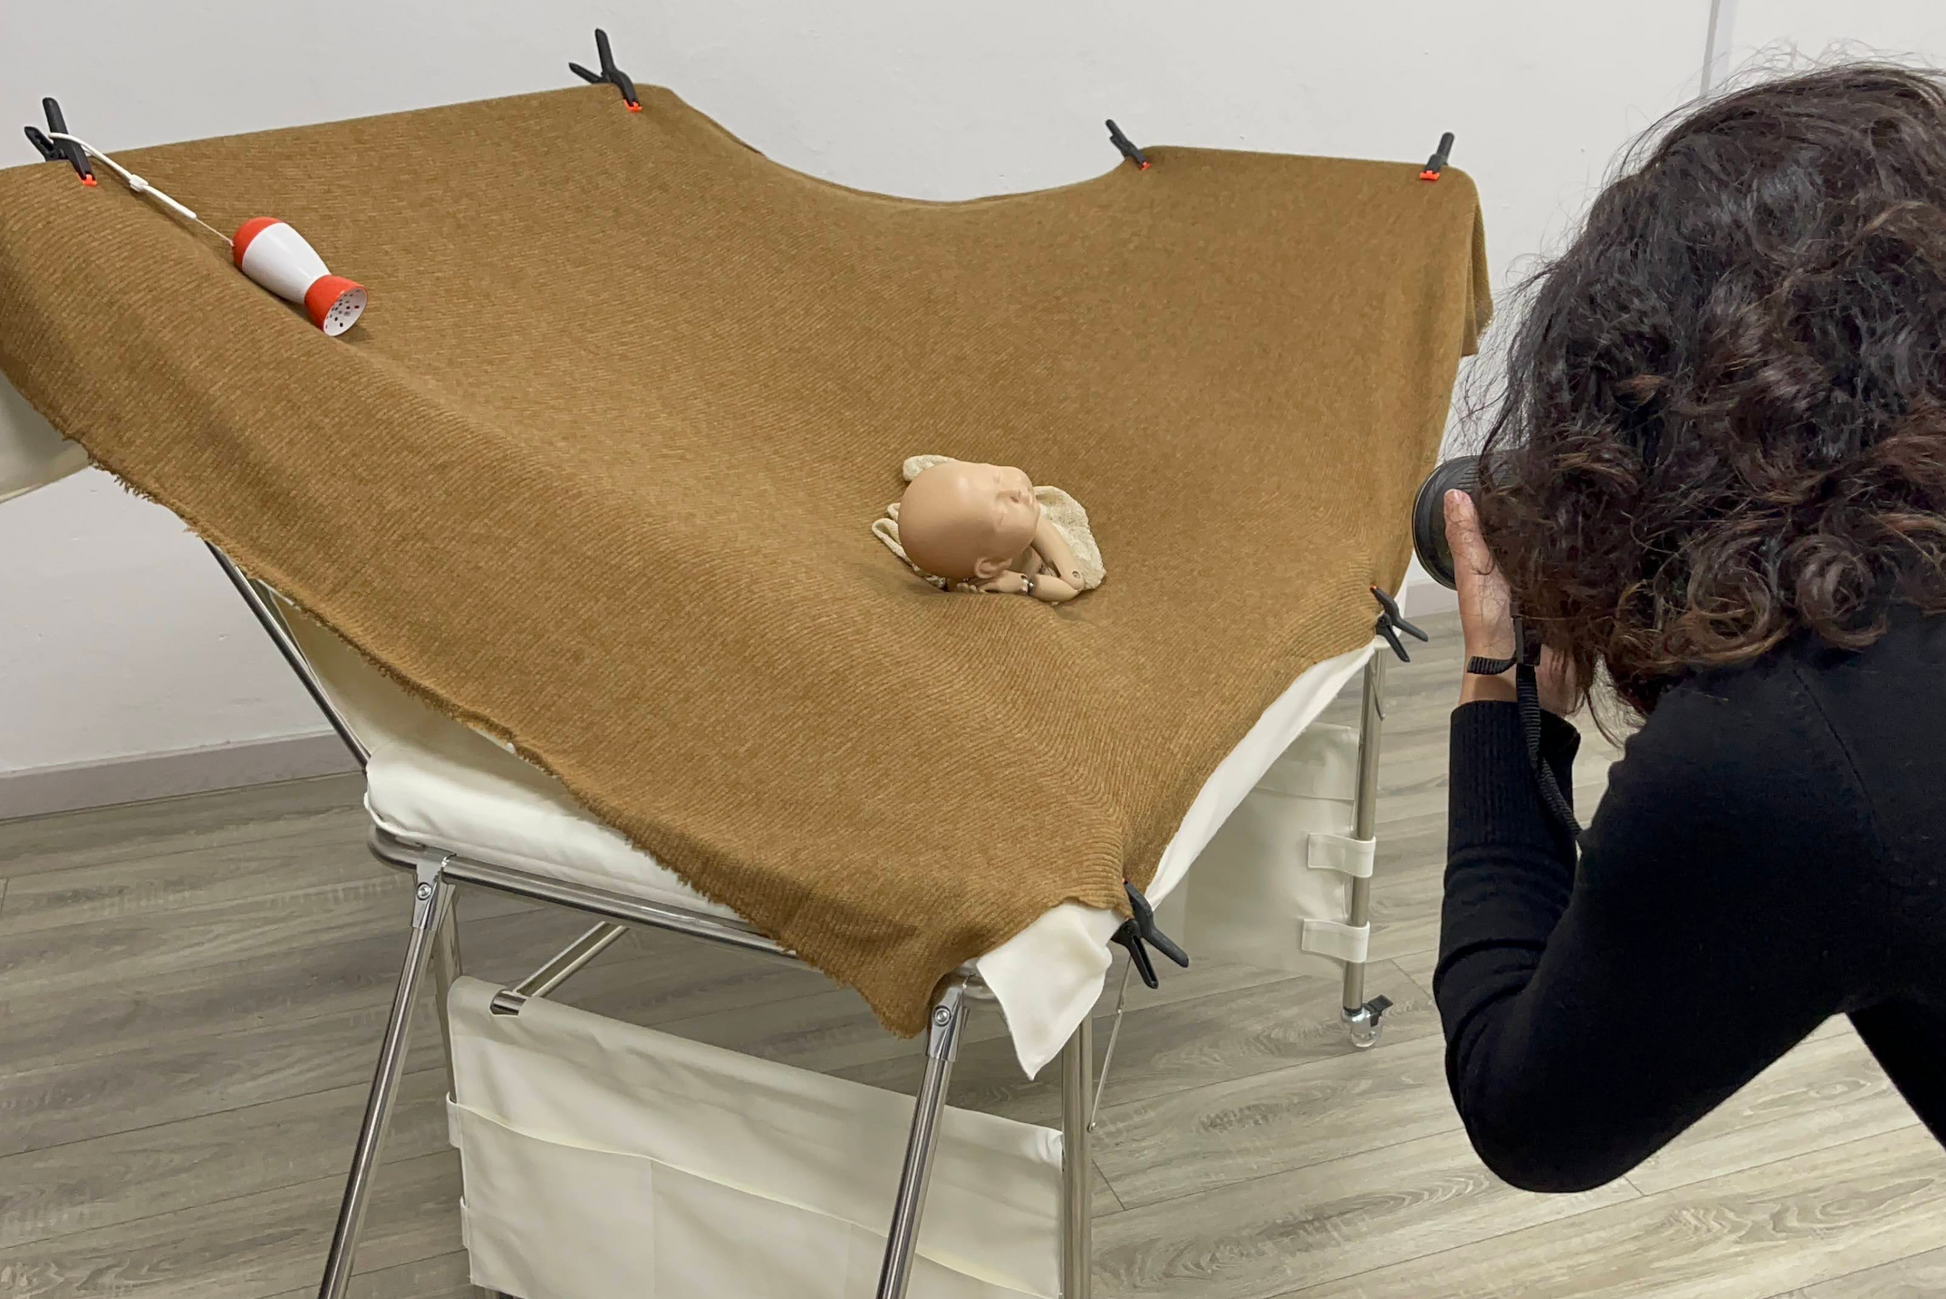 A baby photographer captures an image of a baby doll posed on an extended backdrop surface of a Newborn Photography Posing Table. The table is covered with a brown fabric that is secured with clips, showcasing the ample space for various posing options. The setup highlights the functionality and stability of the posing table for professional newborn photography.